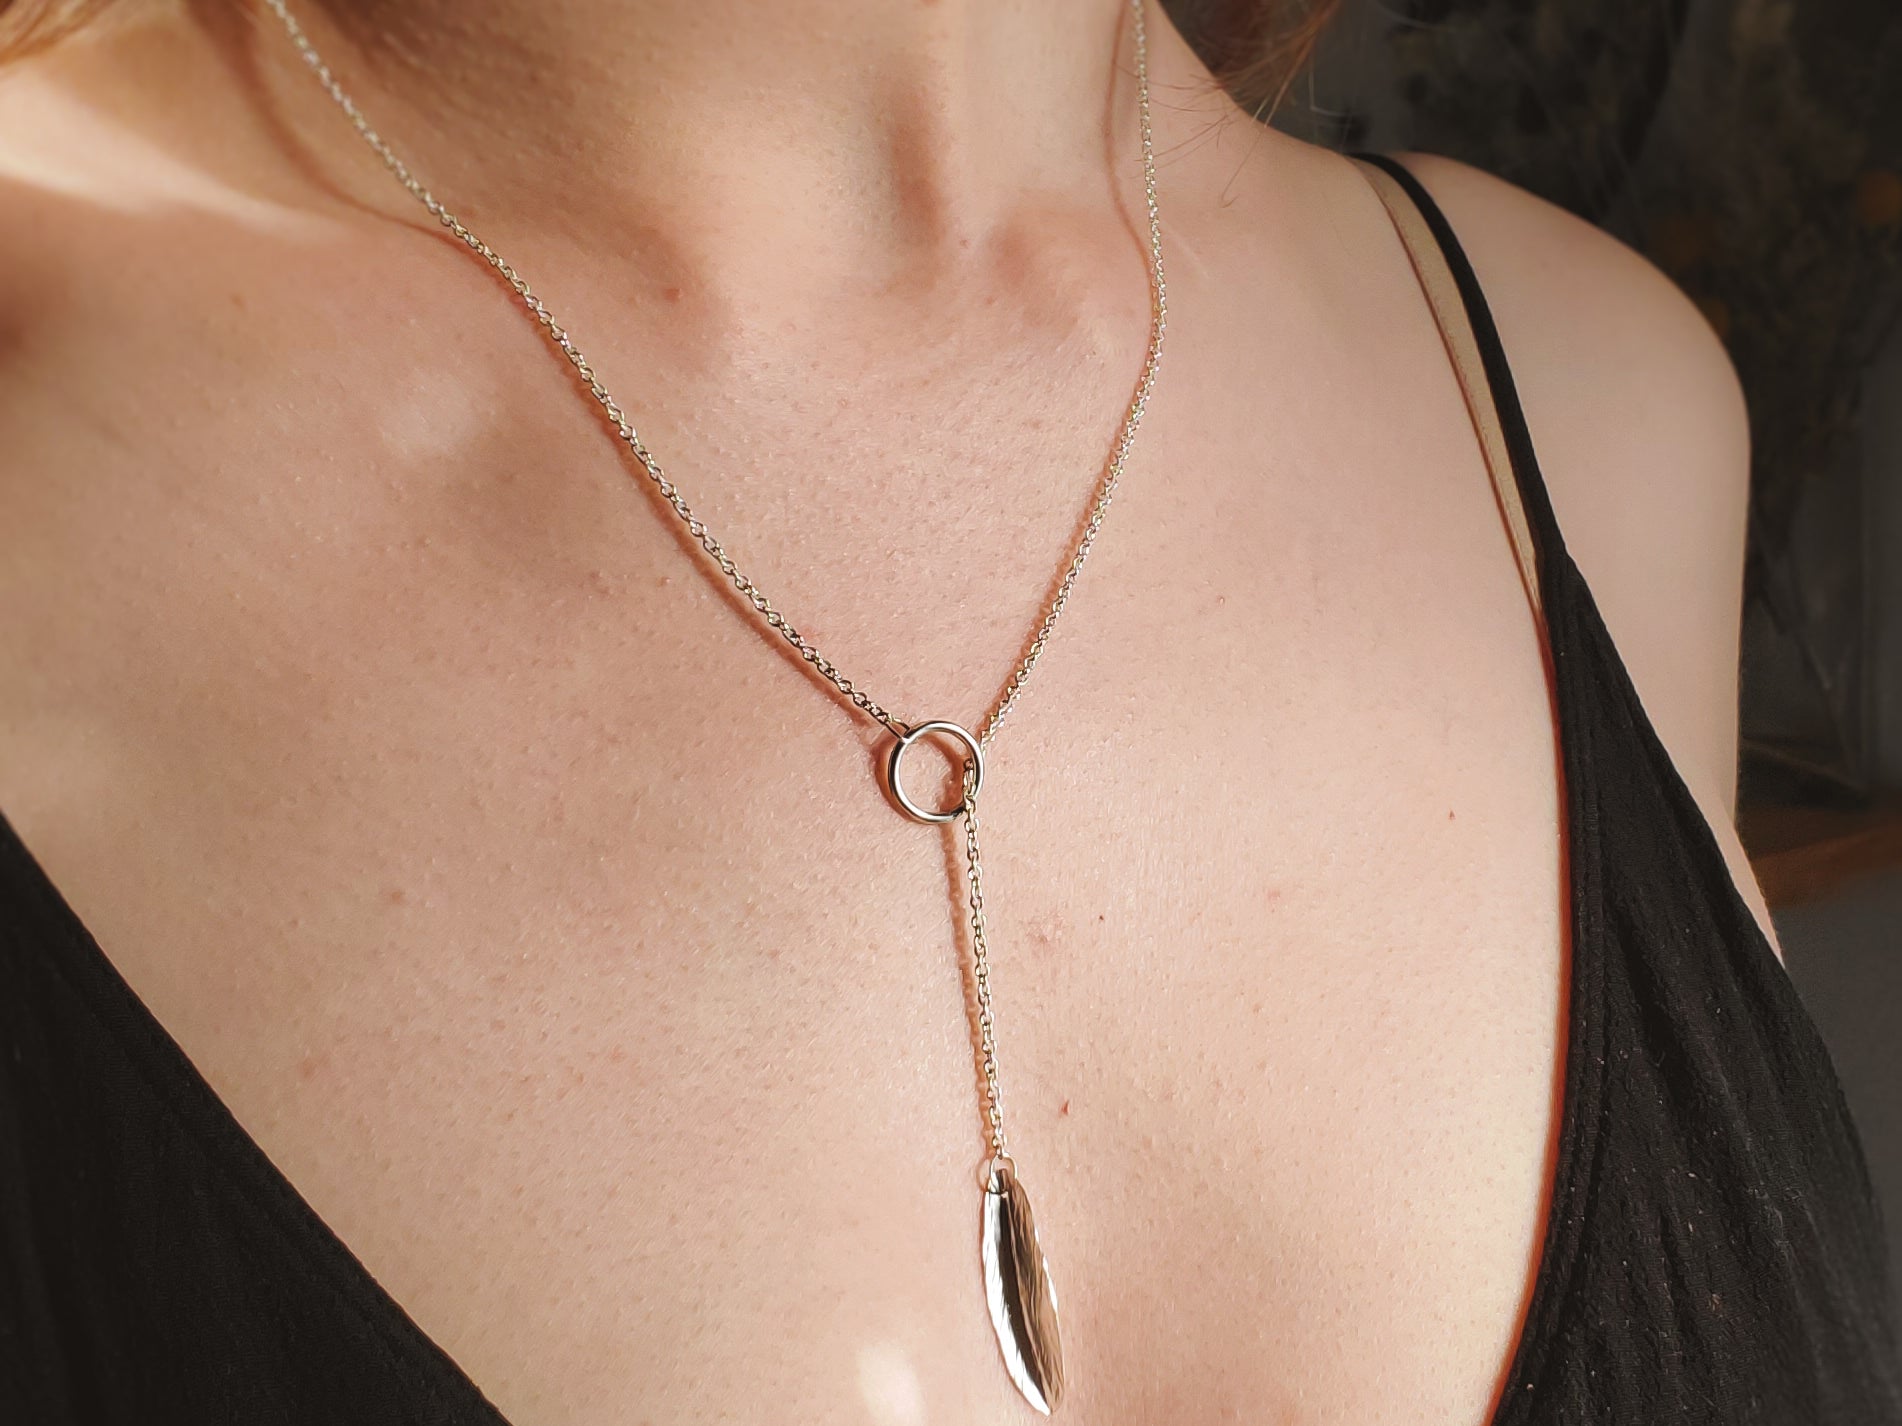 How to wear a lariat necklace?